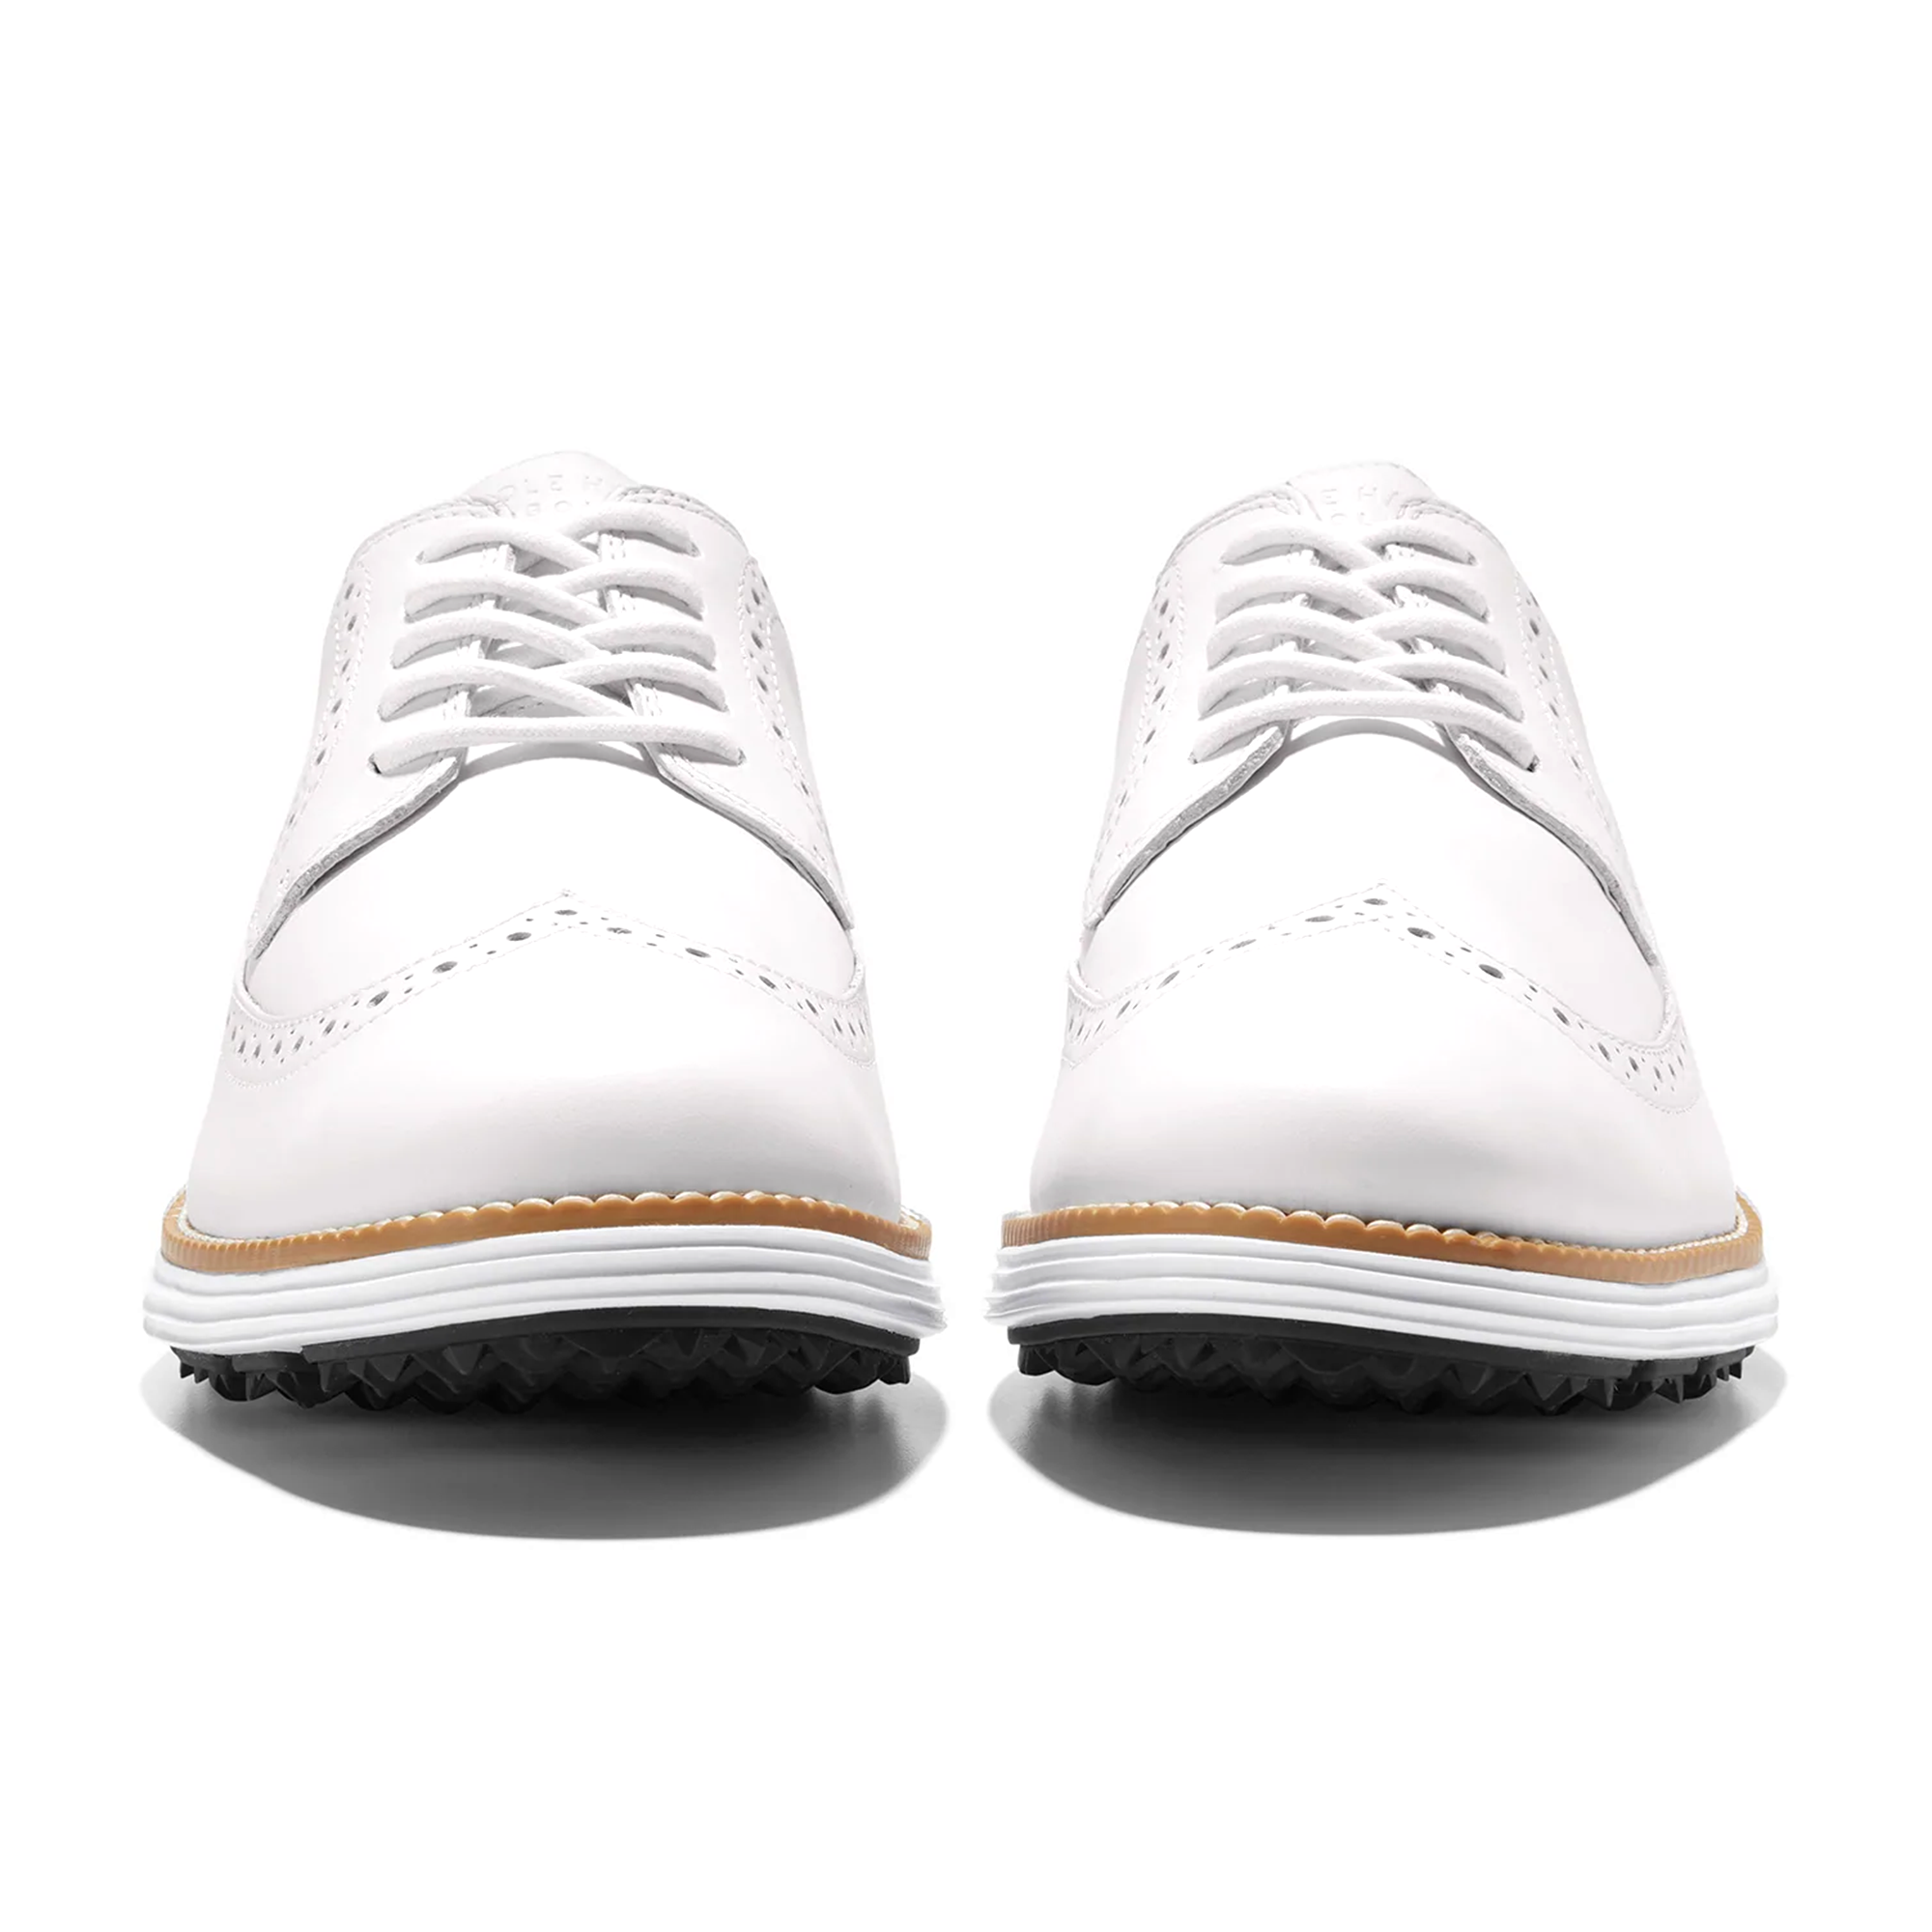 cole-haan-originalgrand-wing-ox-golf-shoes-c37230-optic-white-natural